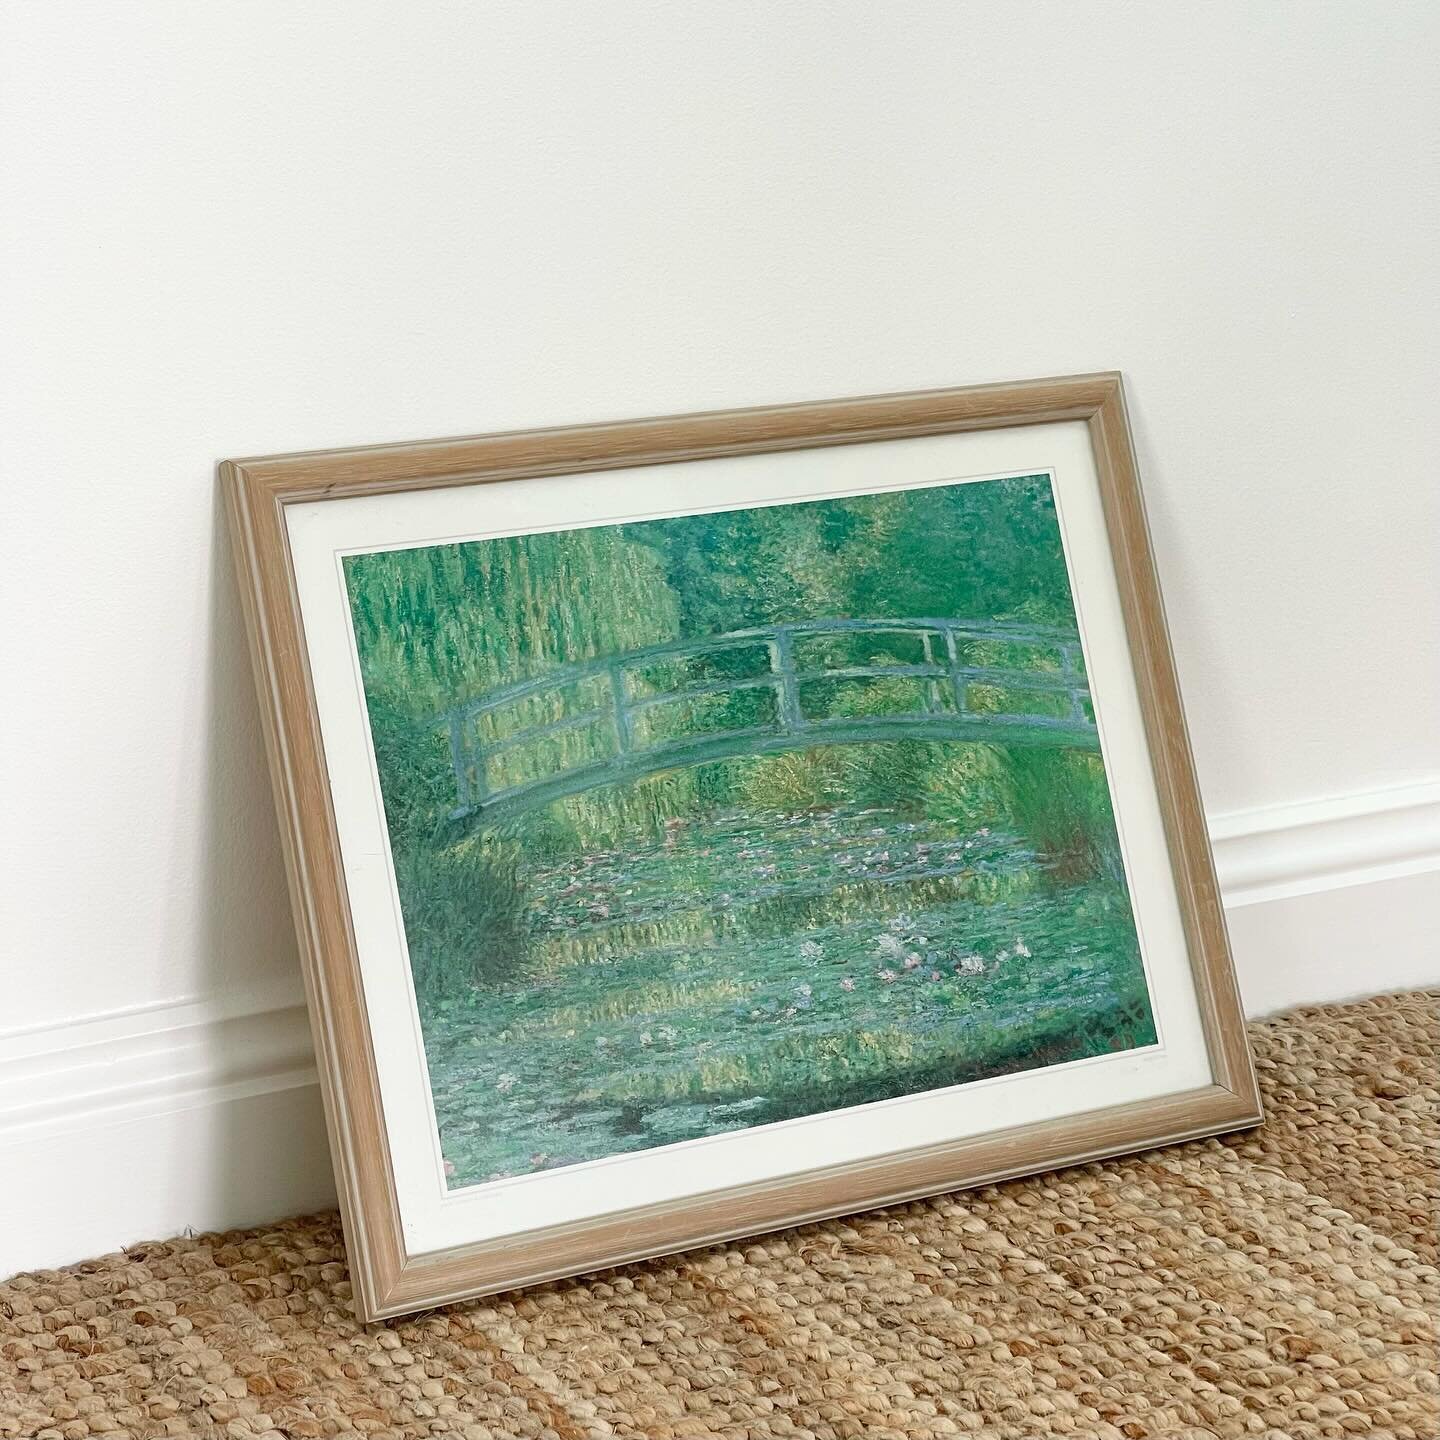 SOLD 🍋 claude monet lily pond framed print 🪷

&bull; doesn&rsquo;t currently have a way to hang, but this can easily be fixed with string &amp; a staple gun
&bull; alternatively, this print is very light so can be hung with command strips or mounti